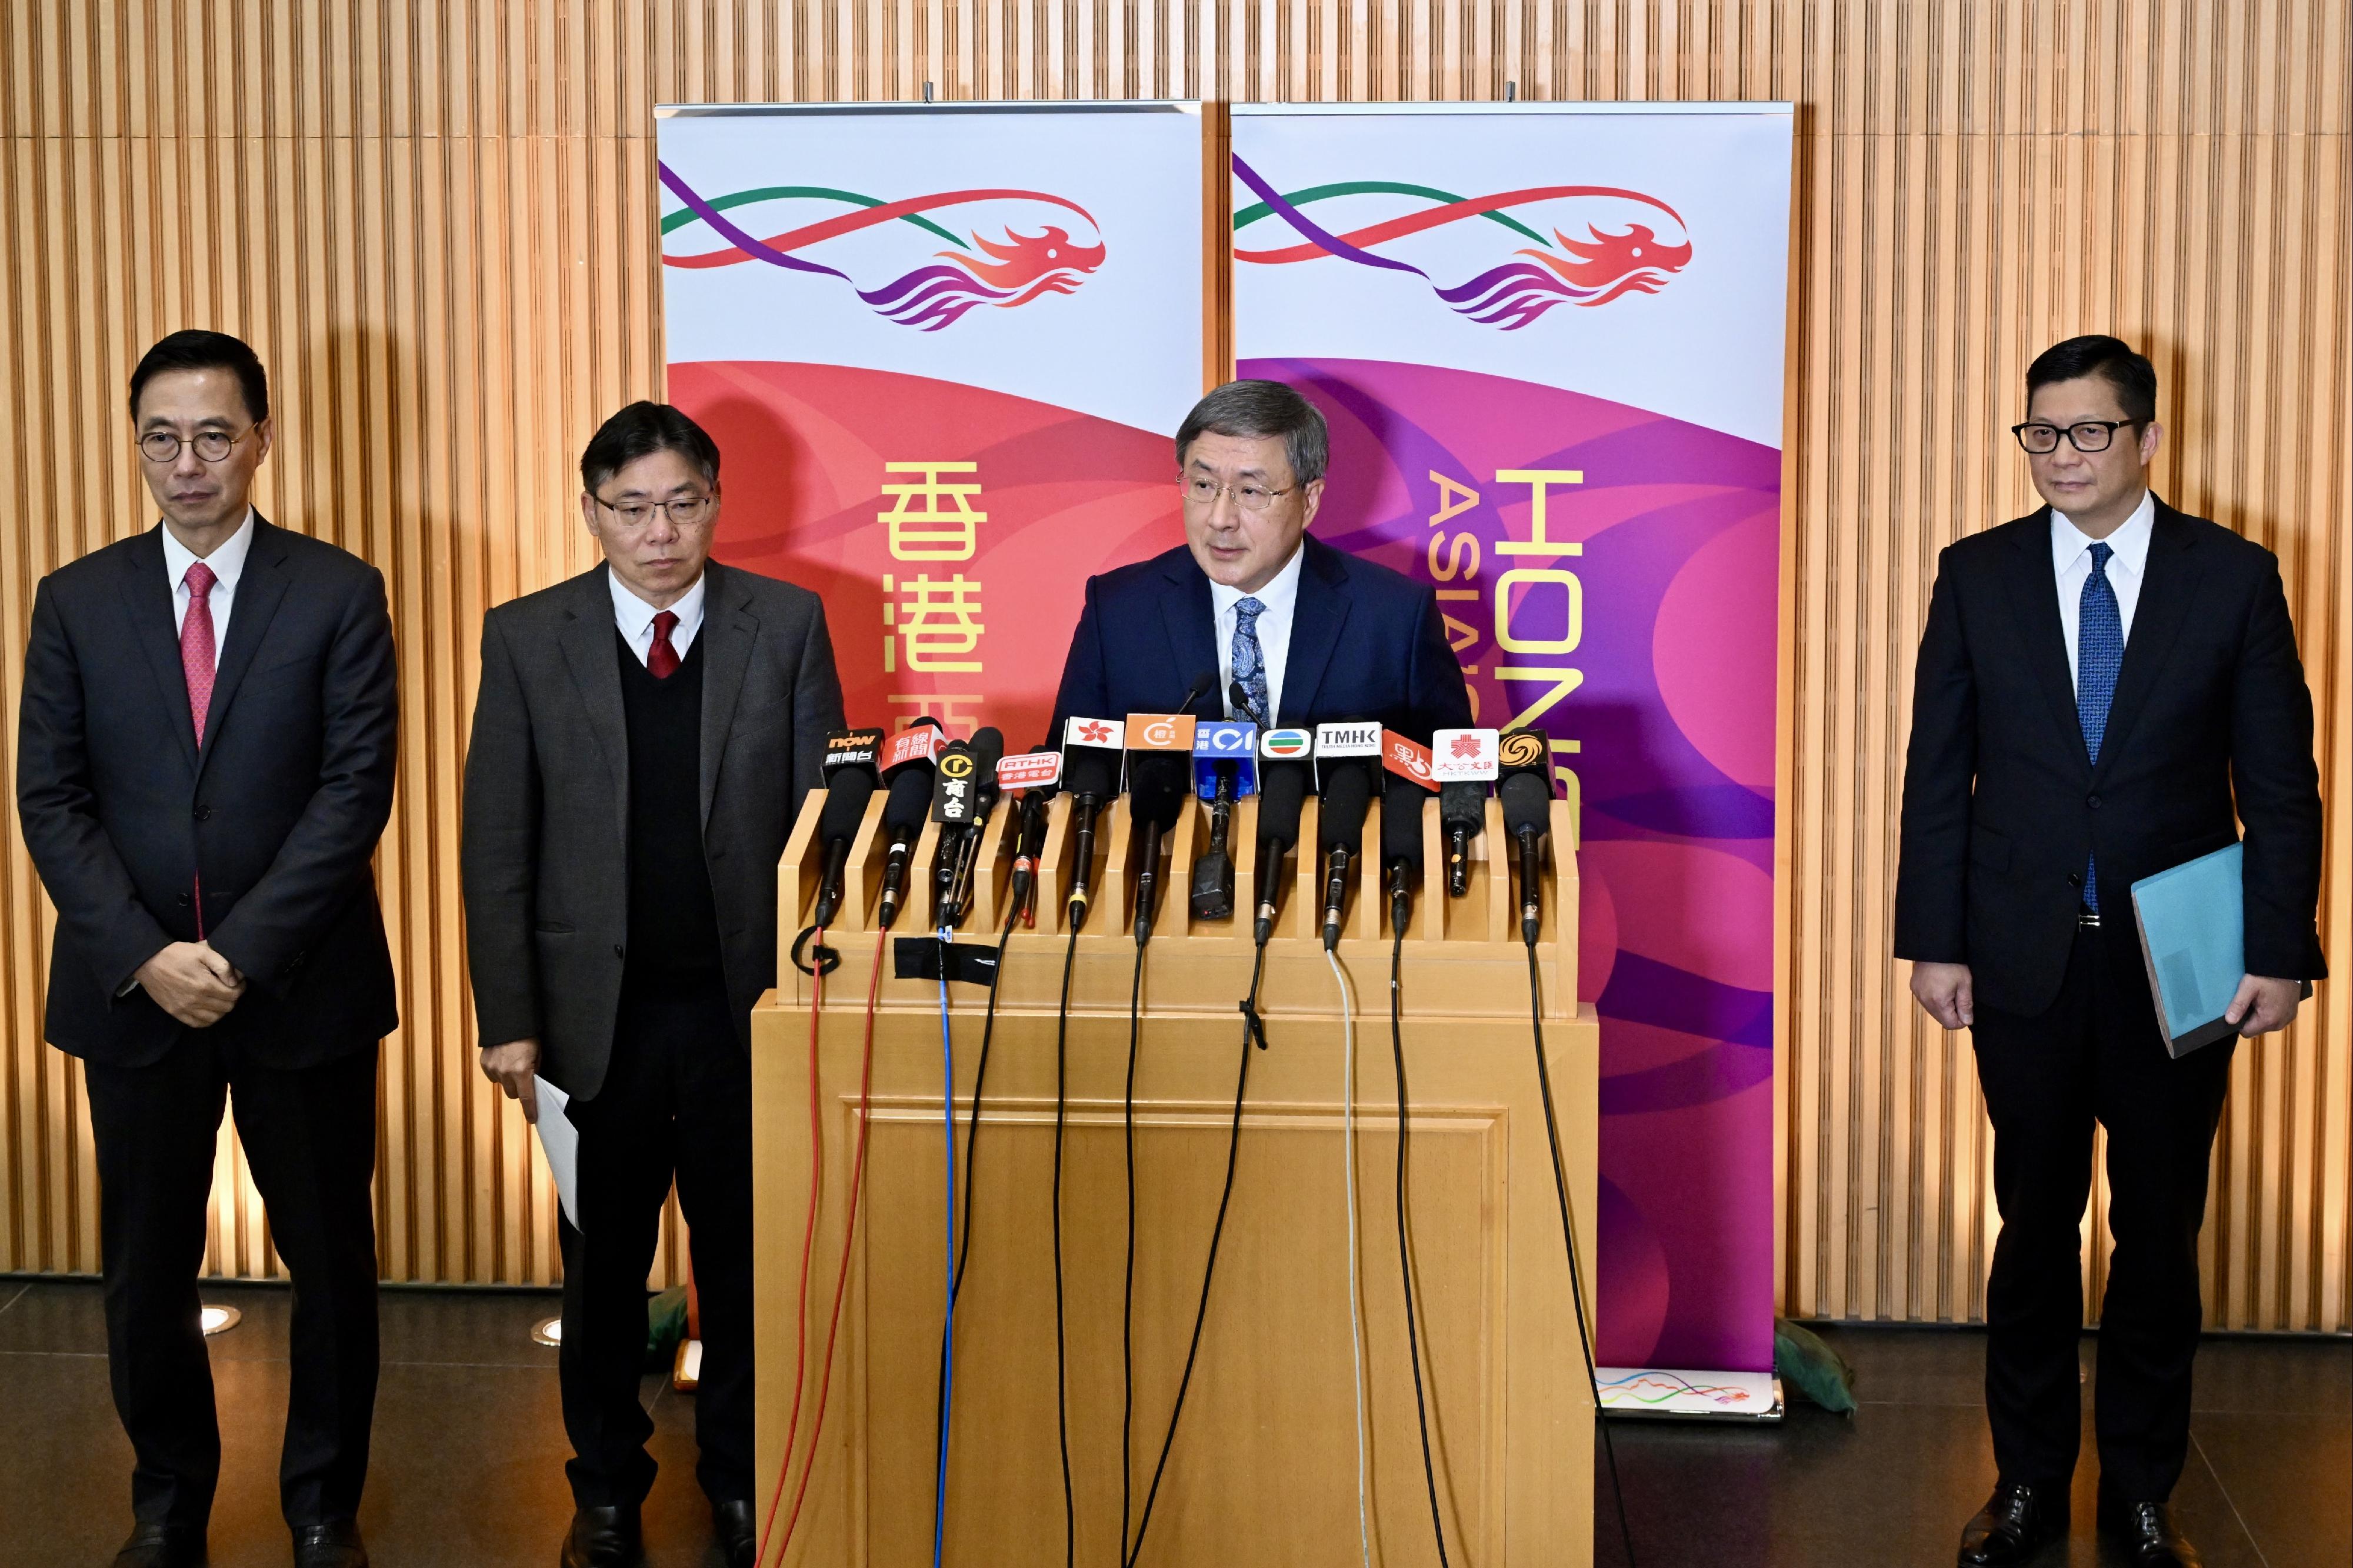 The Acting Chief Secretary for Administration, Mr Cheuk Wing-hing (second right), together with the Secretary for Security, Mr Tang Ping-keung (first right); the Secretary for Transport and Logistics, Mr Lam Sai-hung (second left), and the Secretary for Culture, Sports and Tourism, Mr Kevin Yeung (first left), meet the media today (January 23), on special boundary-crossing arrangements during the Lunar New Year holidays